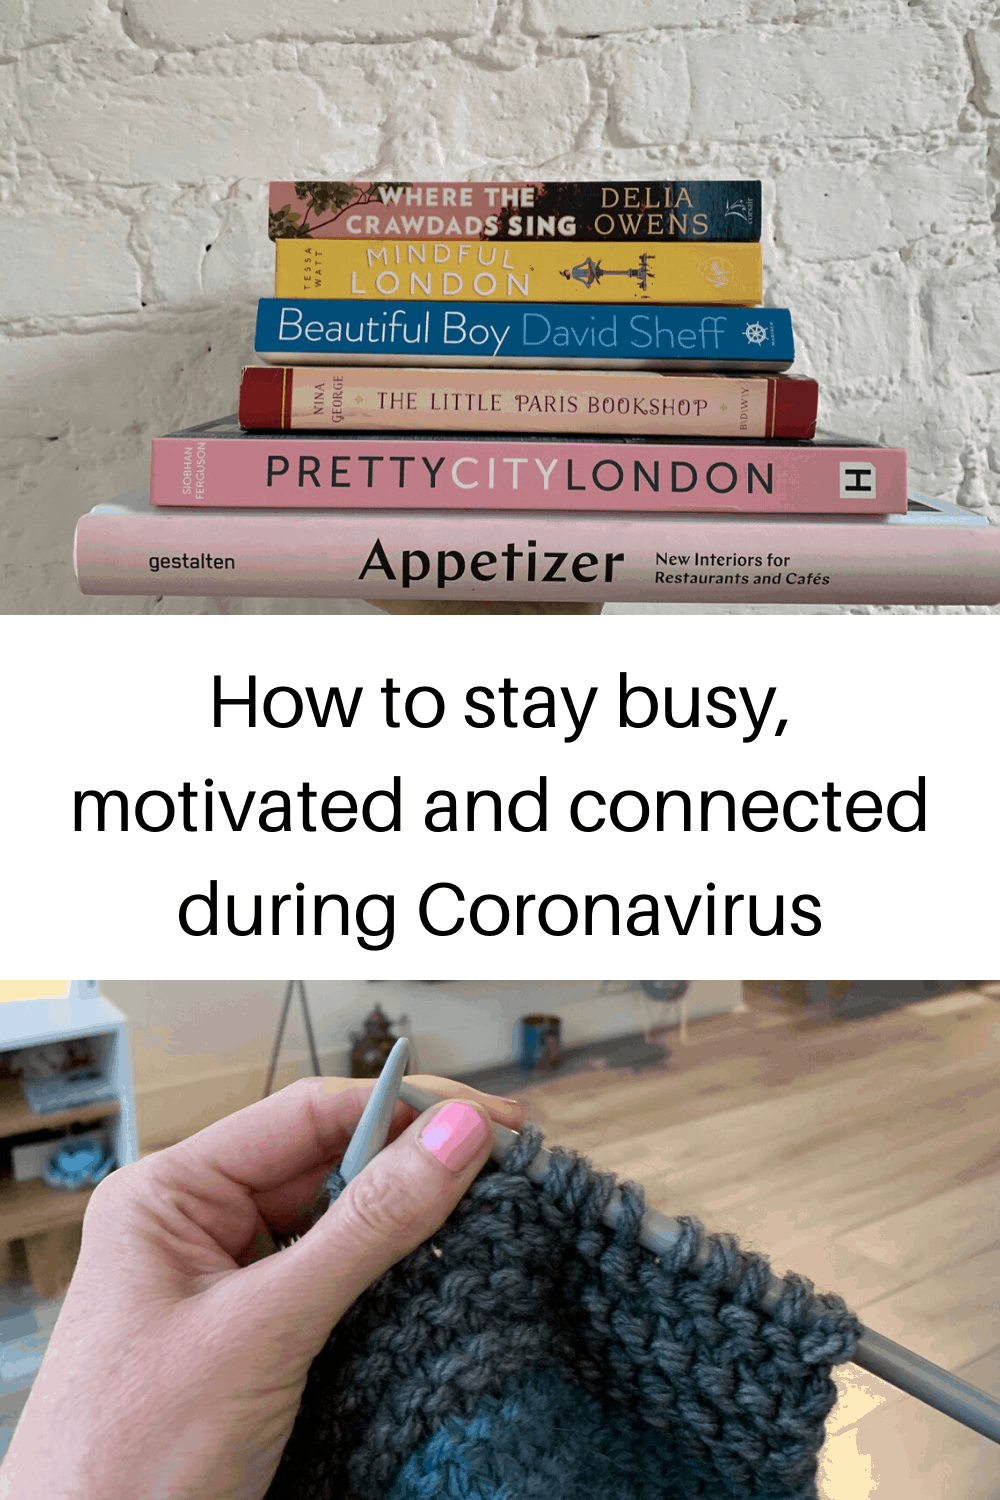 How to stay busy, motivated and connected during Coronavirus